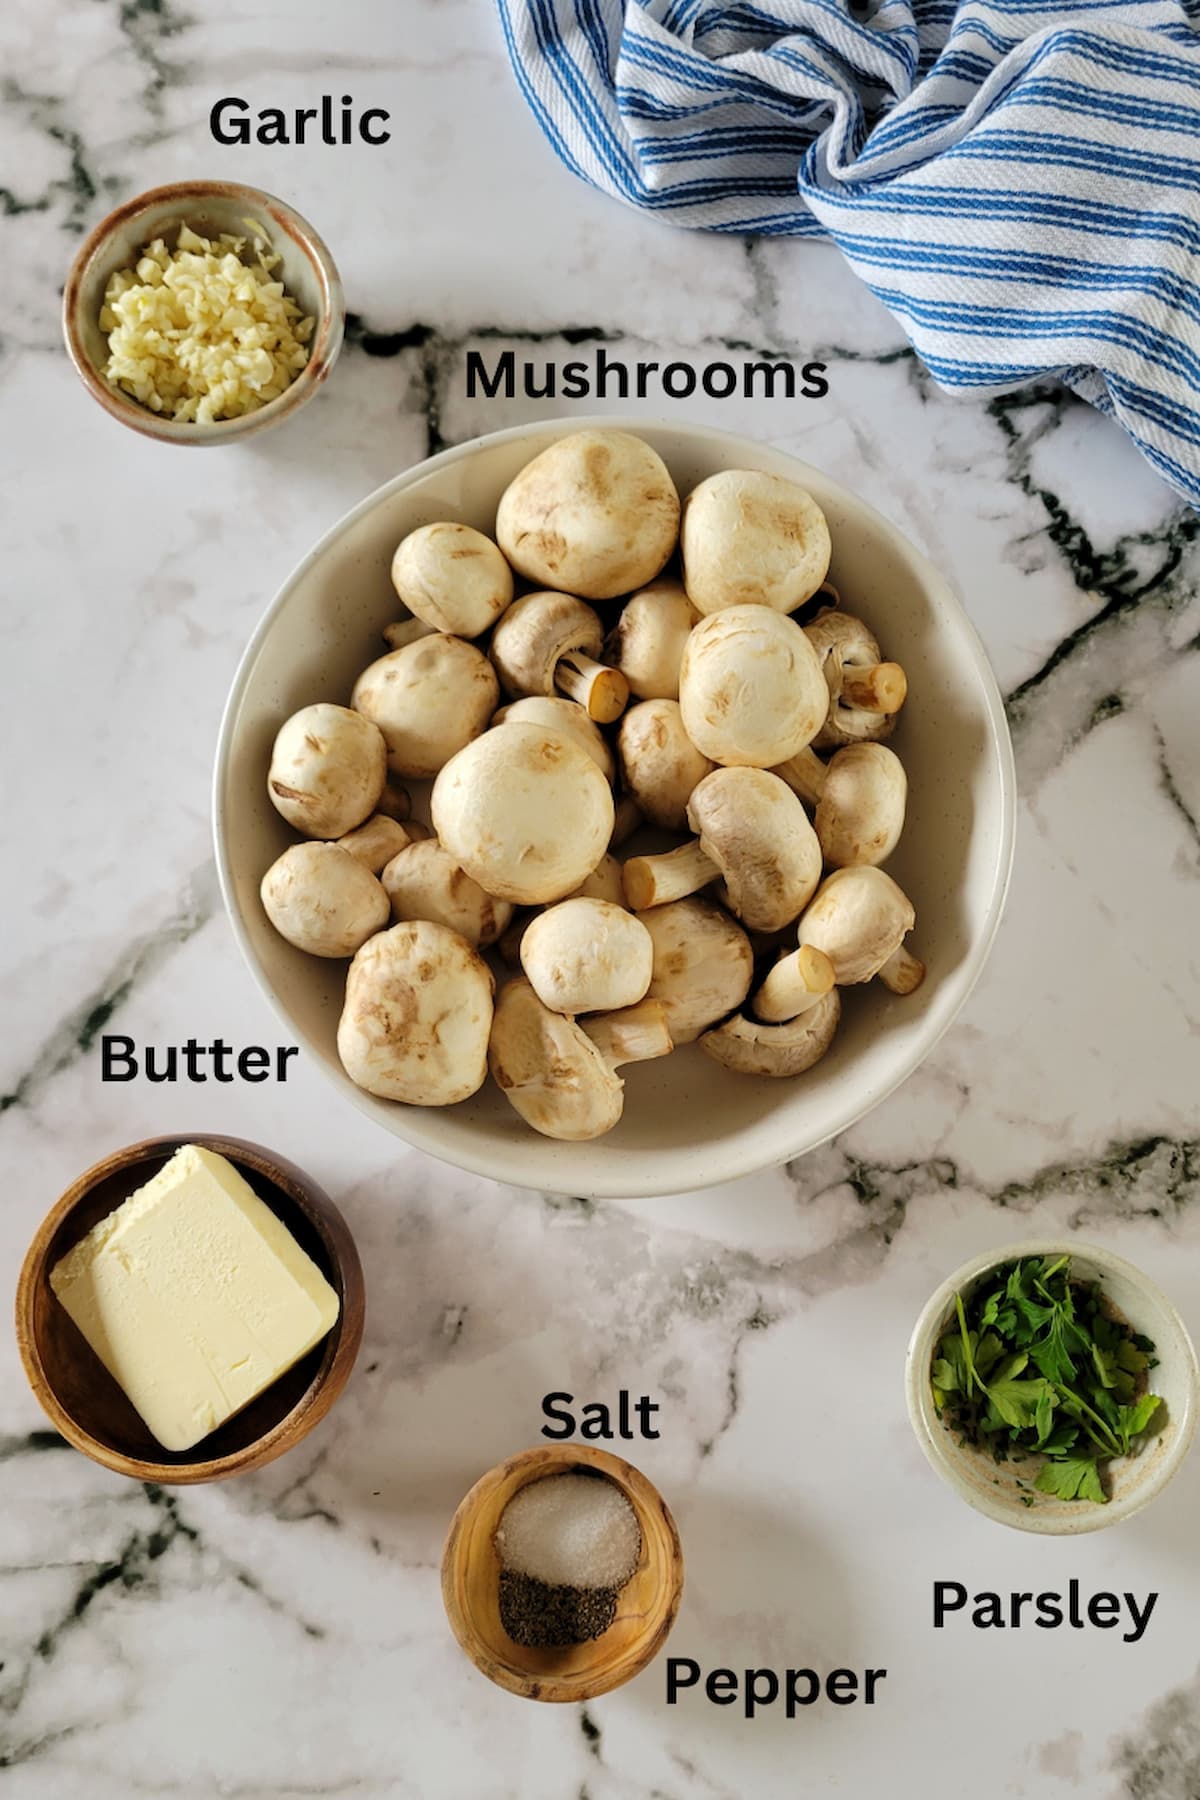 ingredients for mushrooms with garlic butter - garlic, butter, mushrooms, parsley, salt, pepper